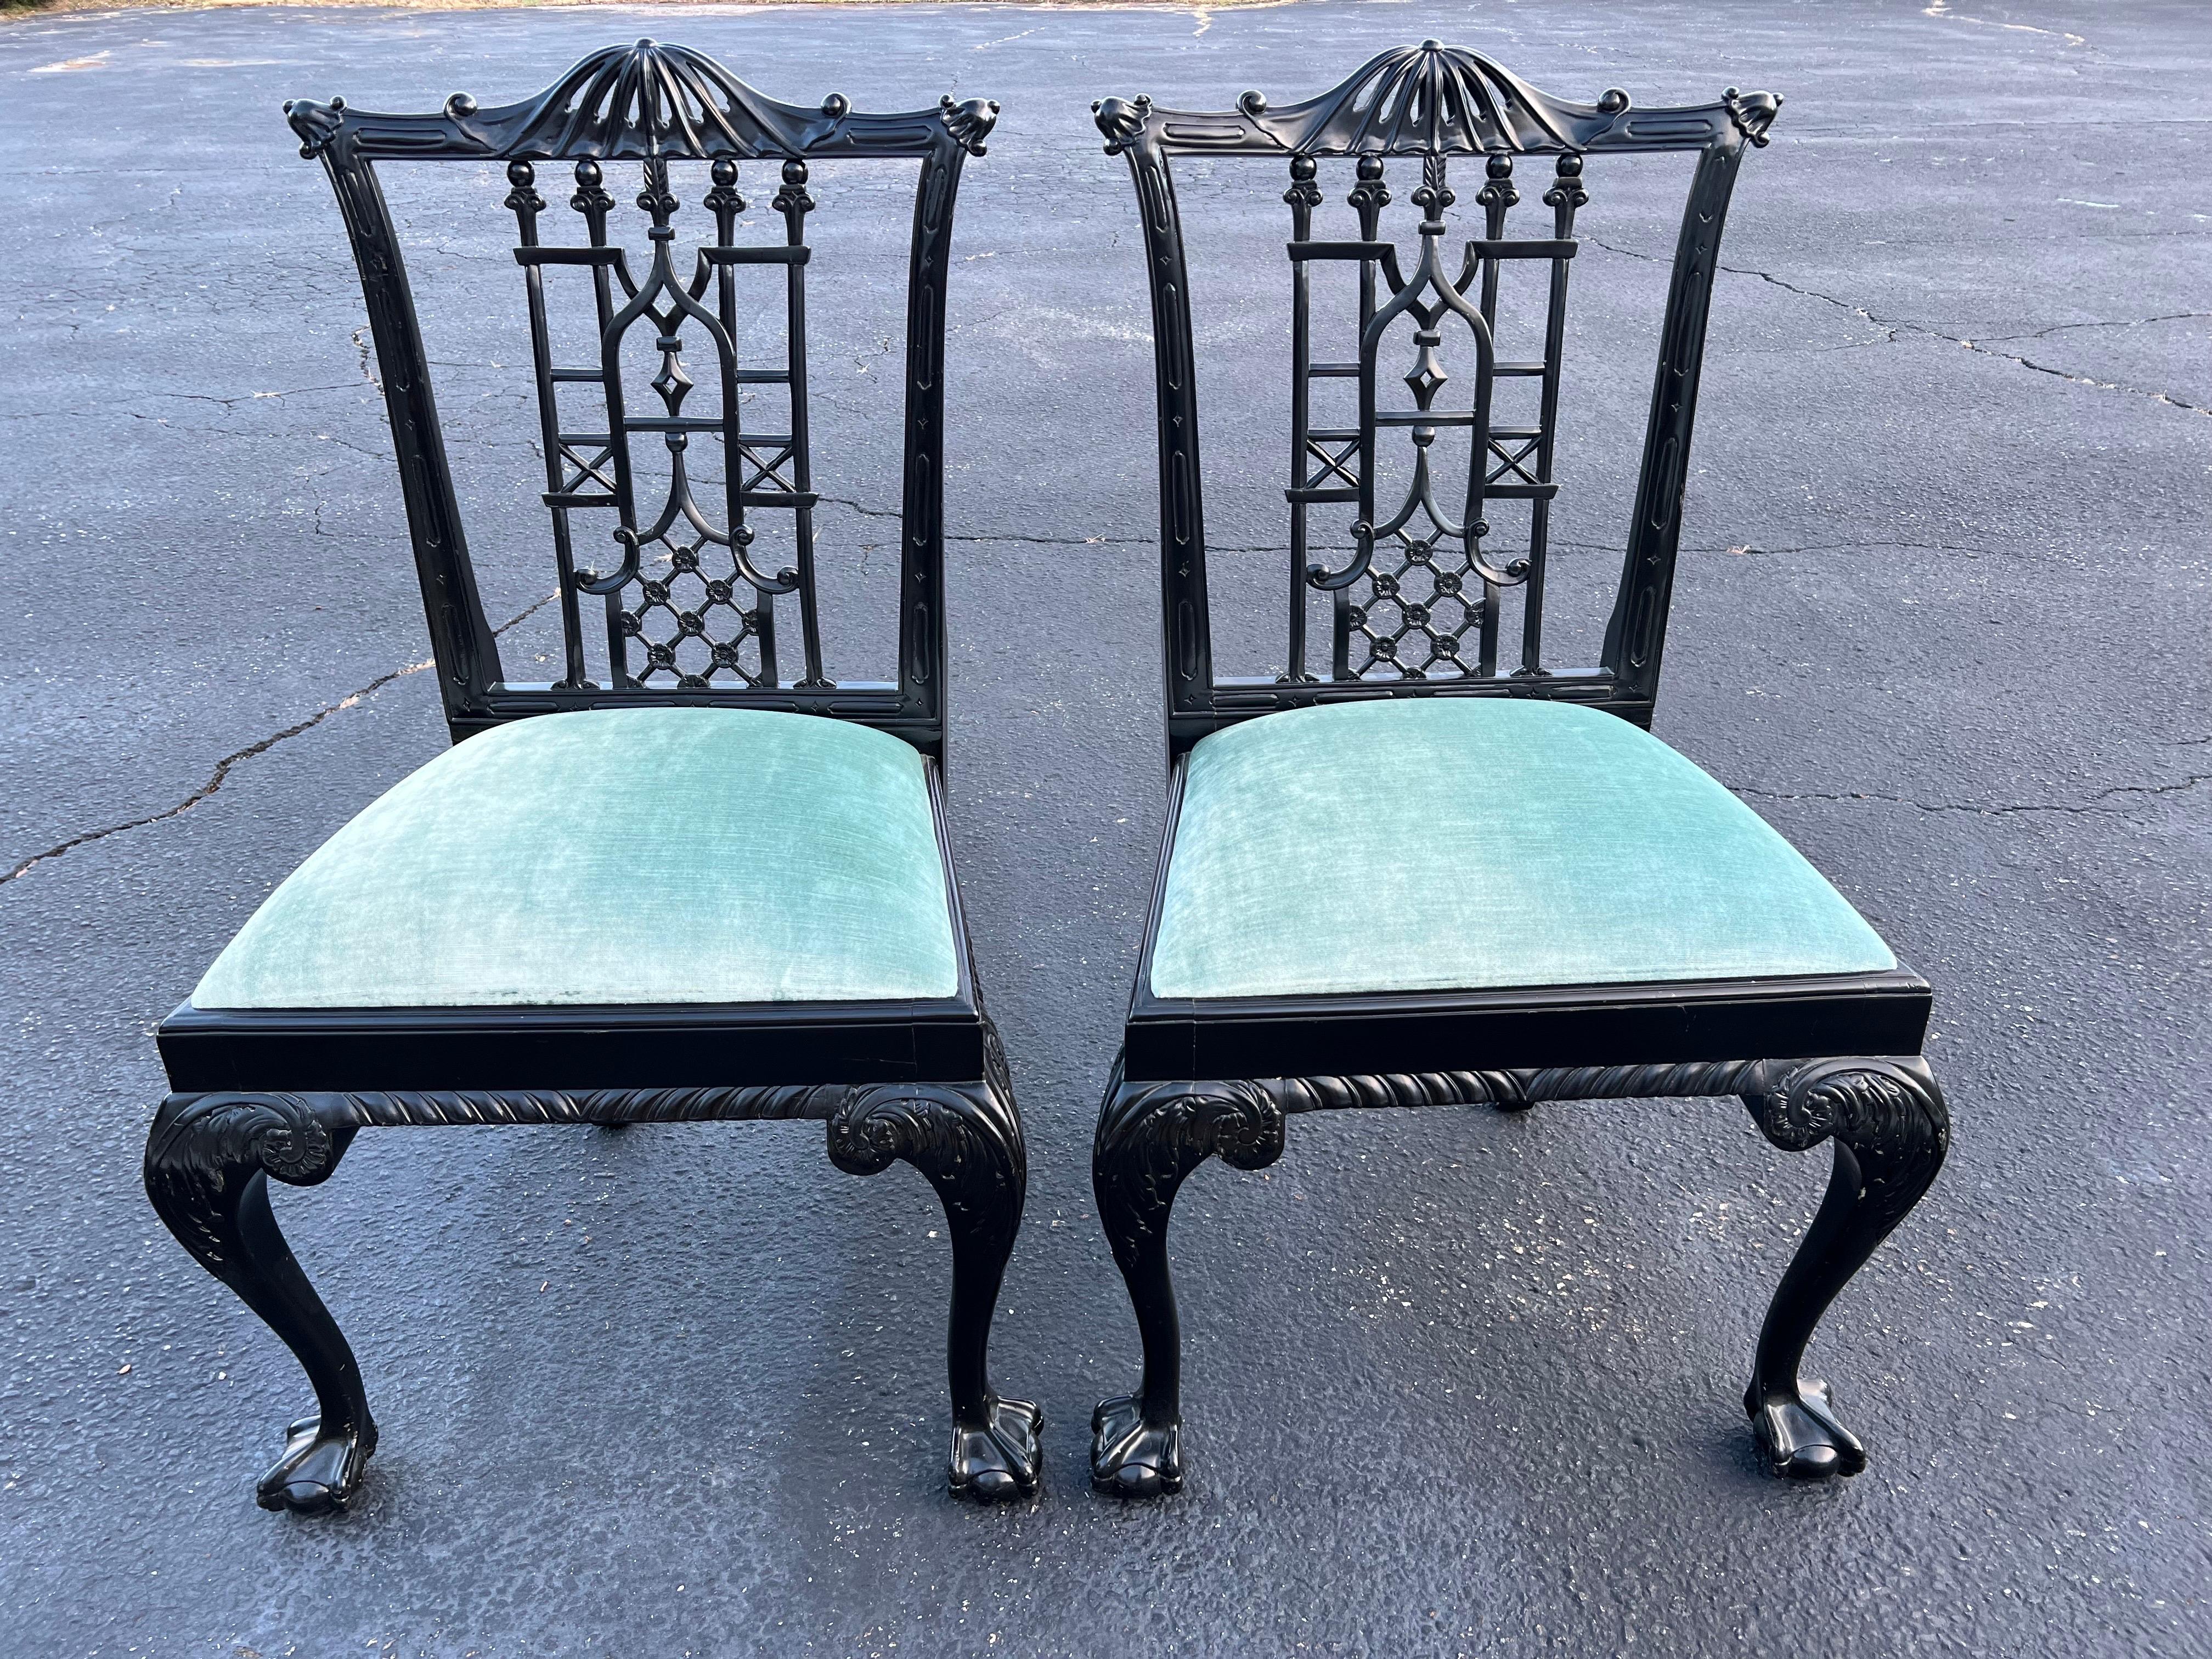 Pair of Black Lacquered Chinoiserie Chairs. Classic Palm Beach Style chairs in the style of Dorothy Draper. Classic Black Gloss finish with blue velvet seat cushions. Ready for use at a dining table or use at two different desks.